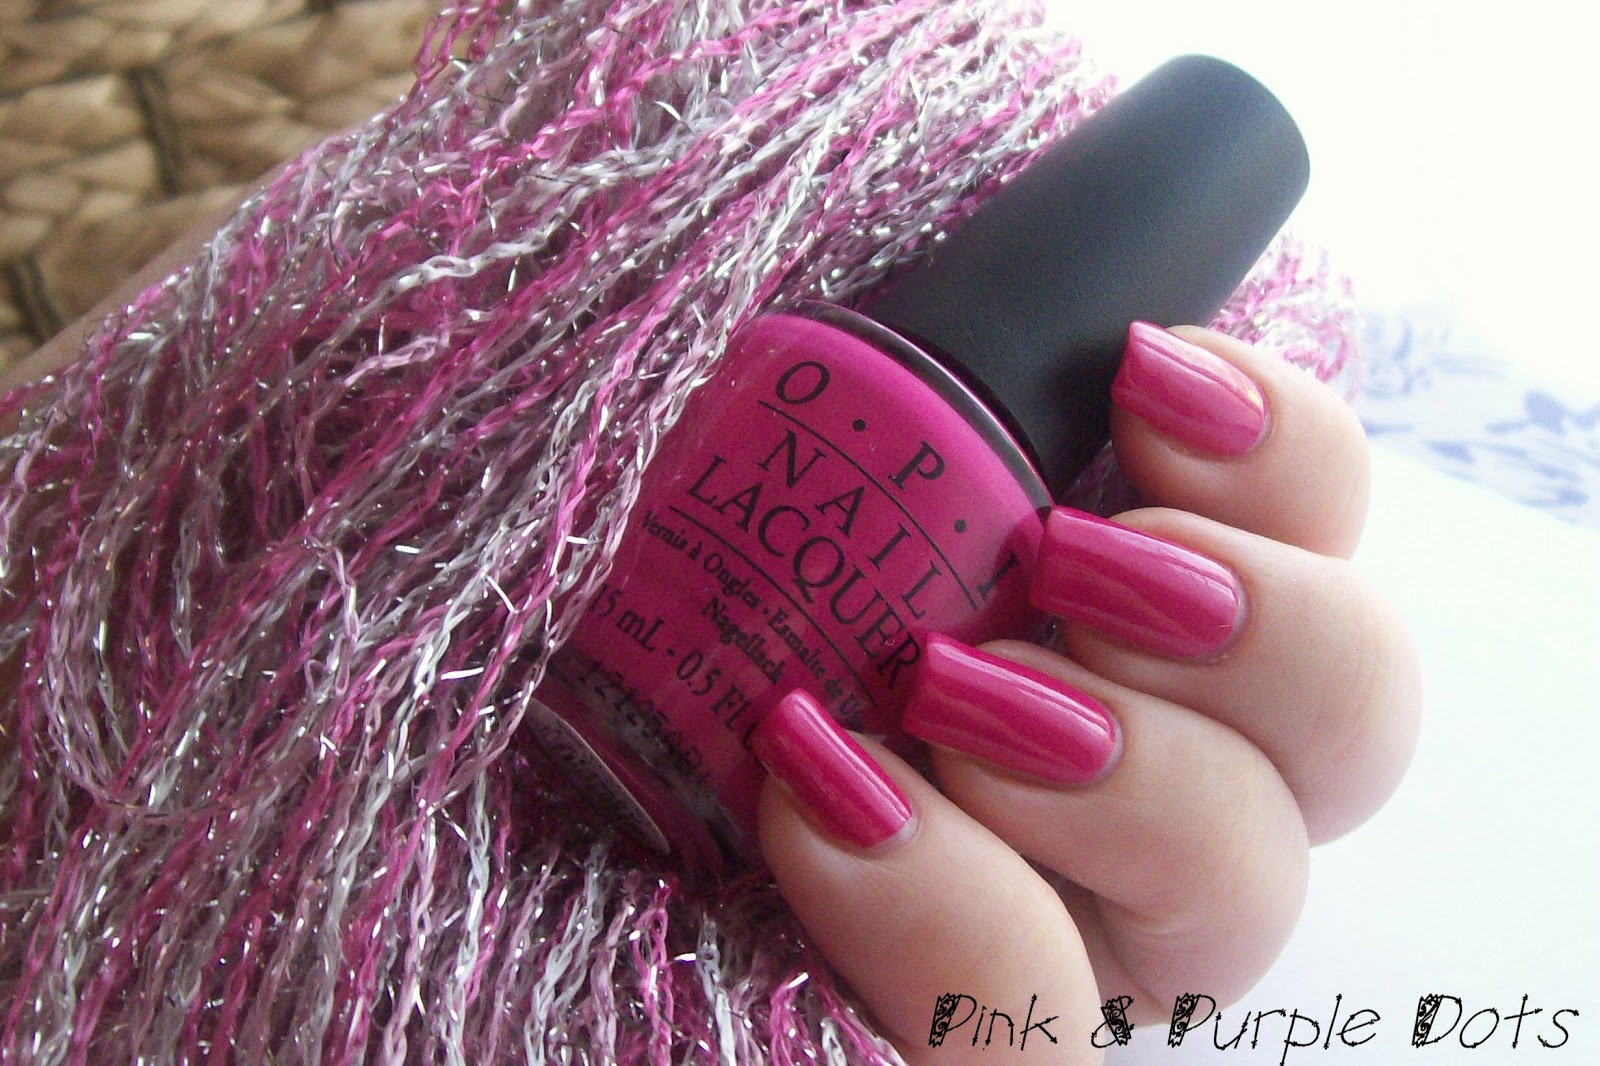 7. OPI Nail Lacquer in "Pink Flamenco" - wide 2